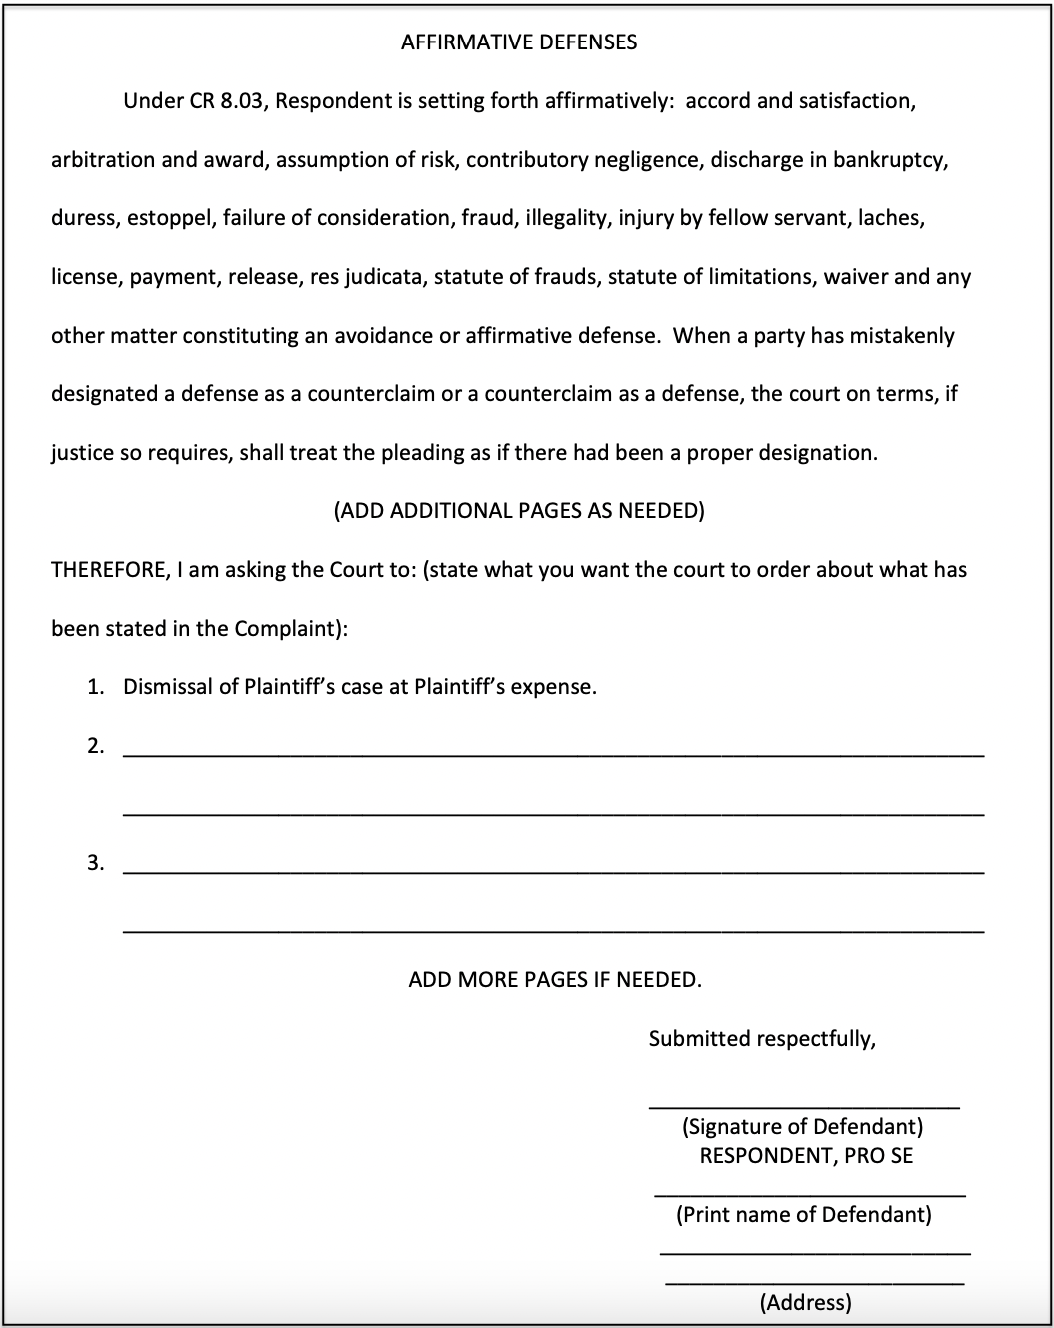 Image of the Affirmative Defenses section of a Kentucky Answer Form